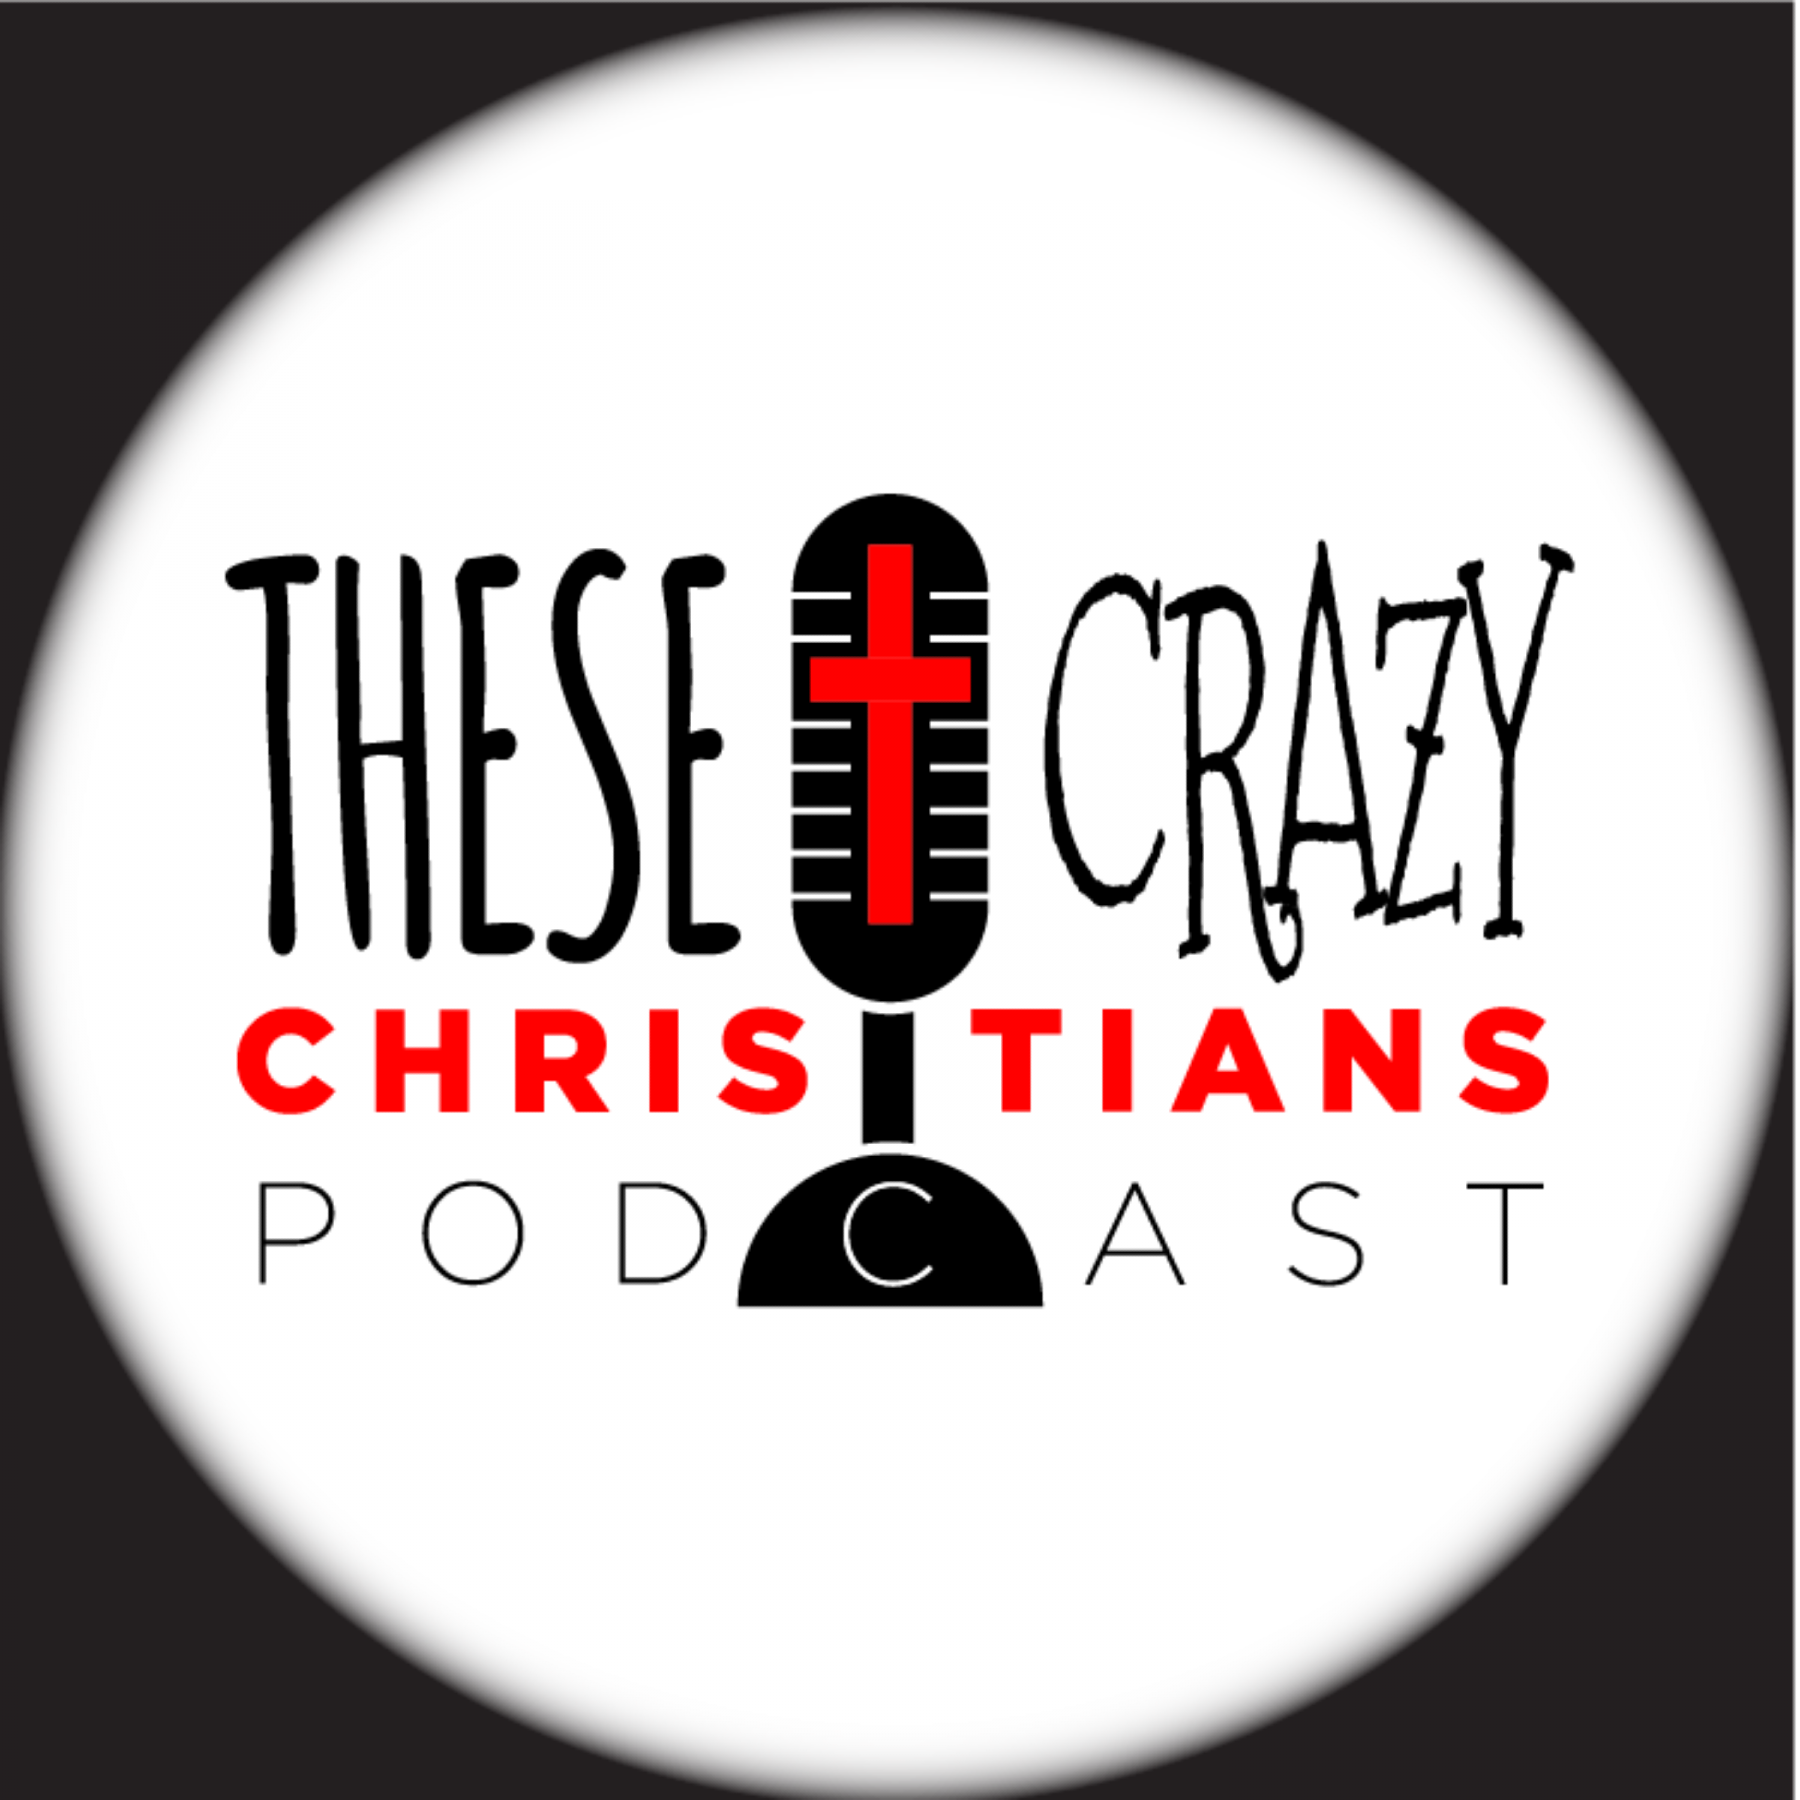 The These Crazy Christians's Podcast